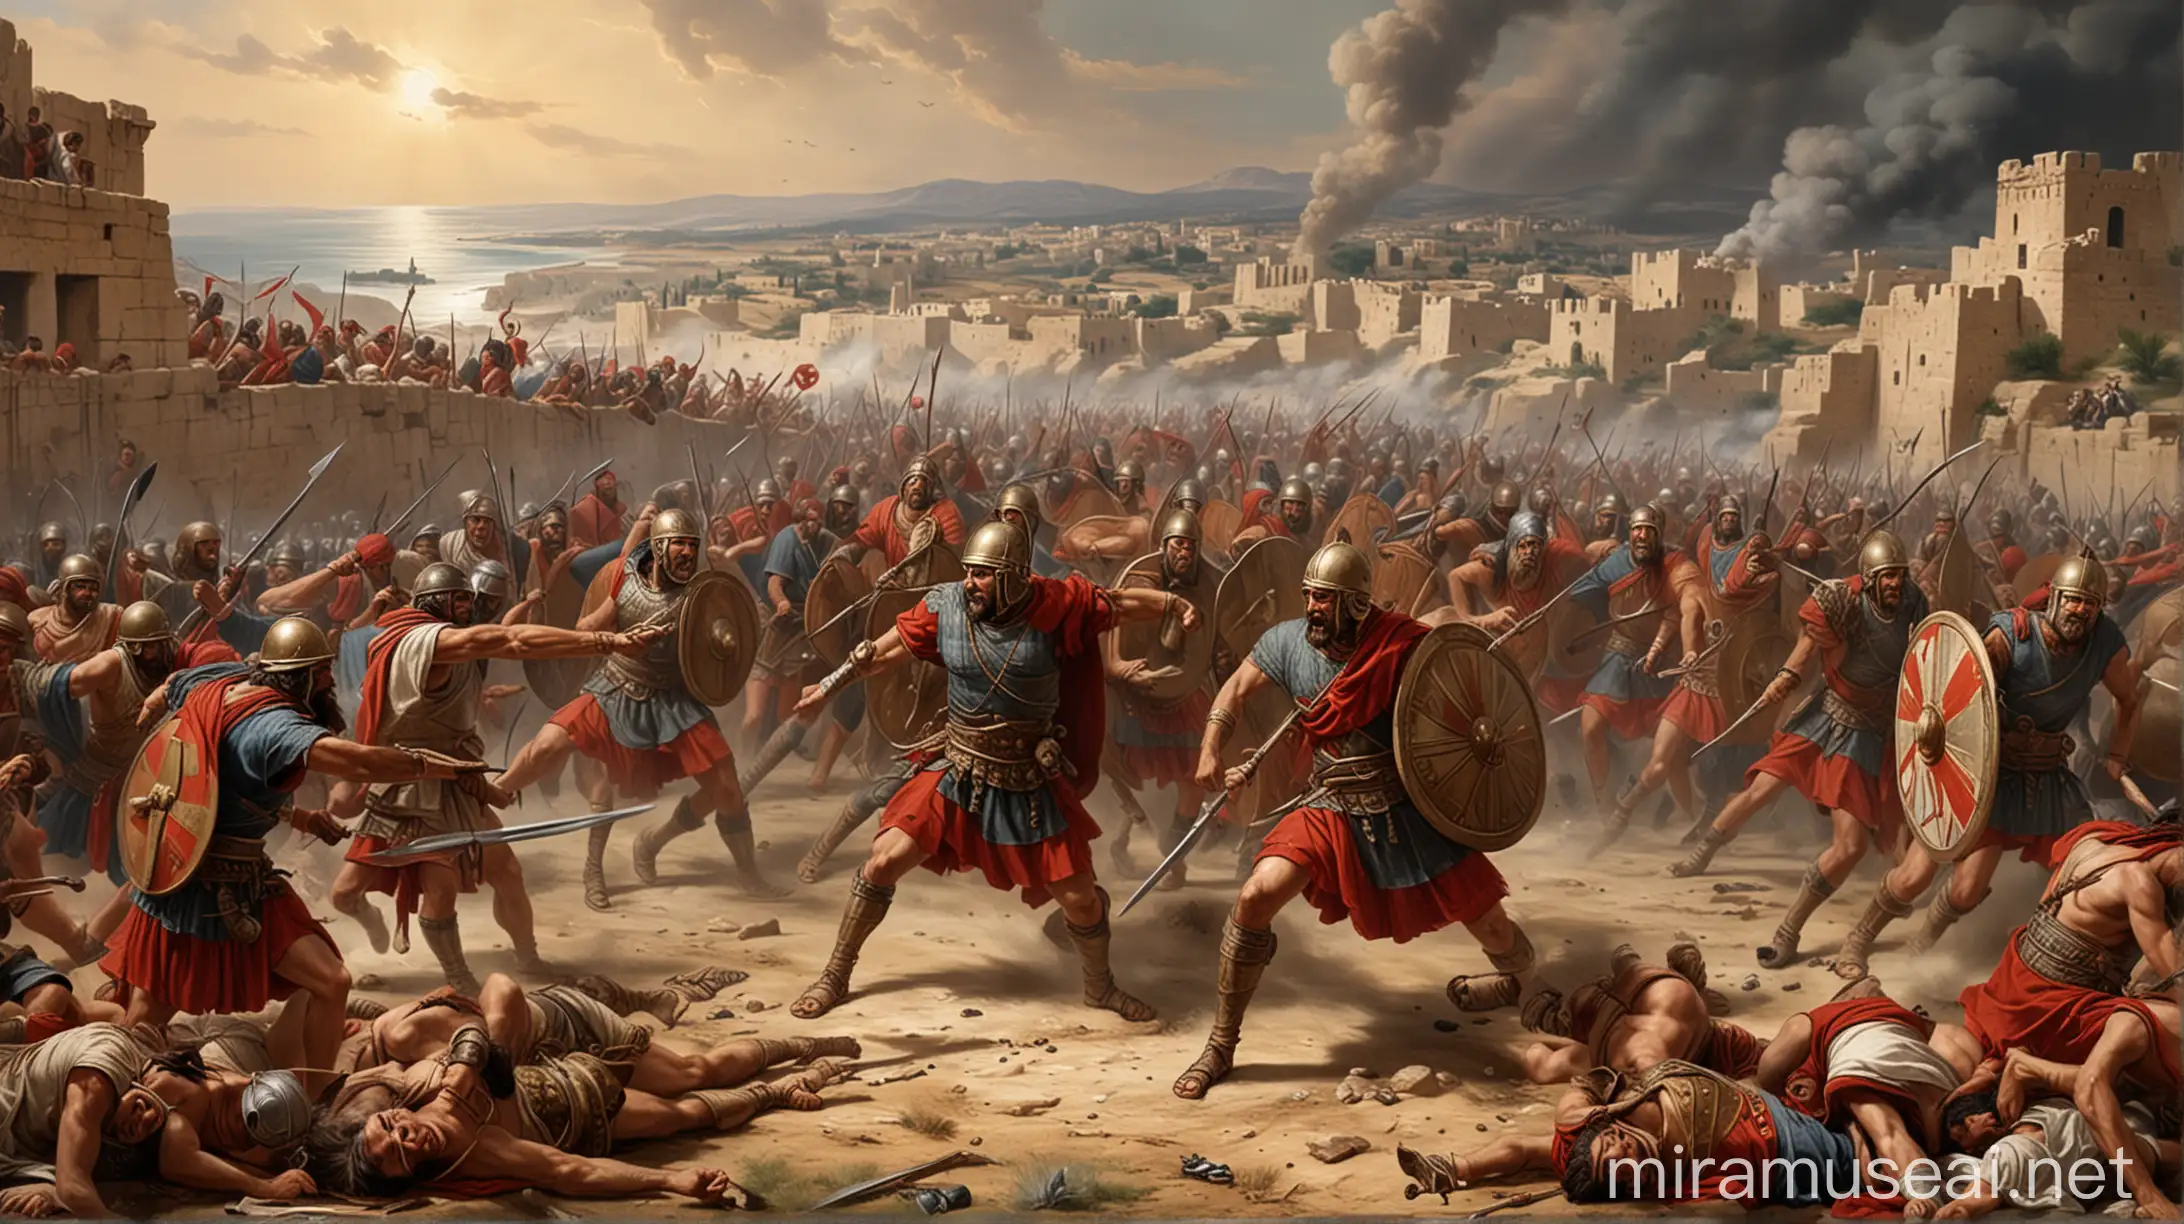 Ancient Aramean Victory over Israelites in Battle